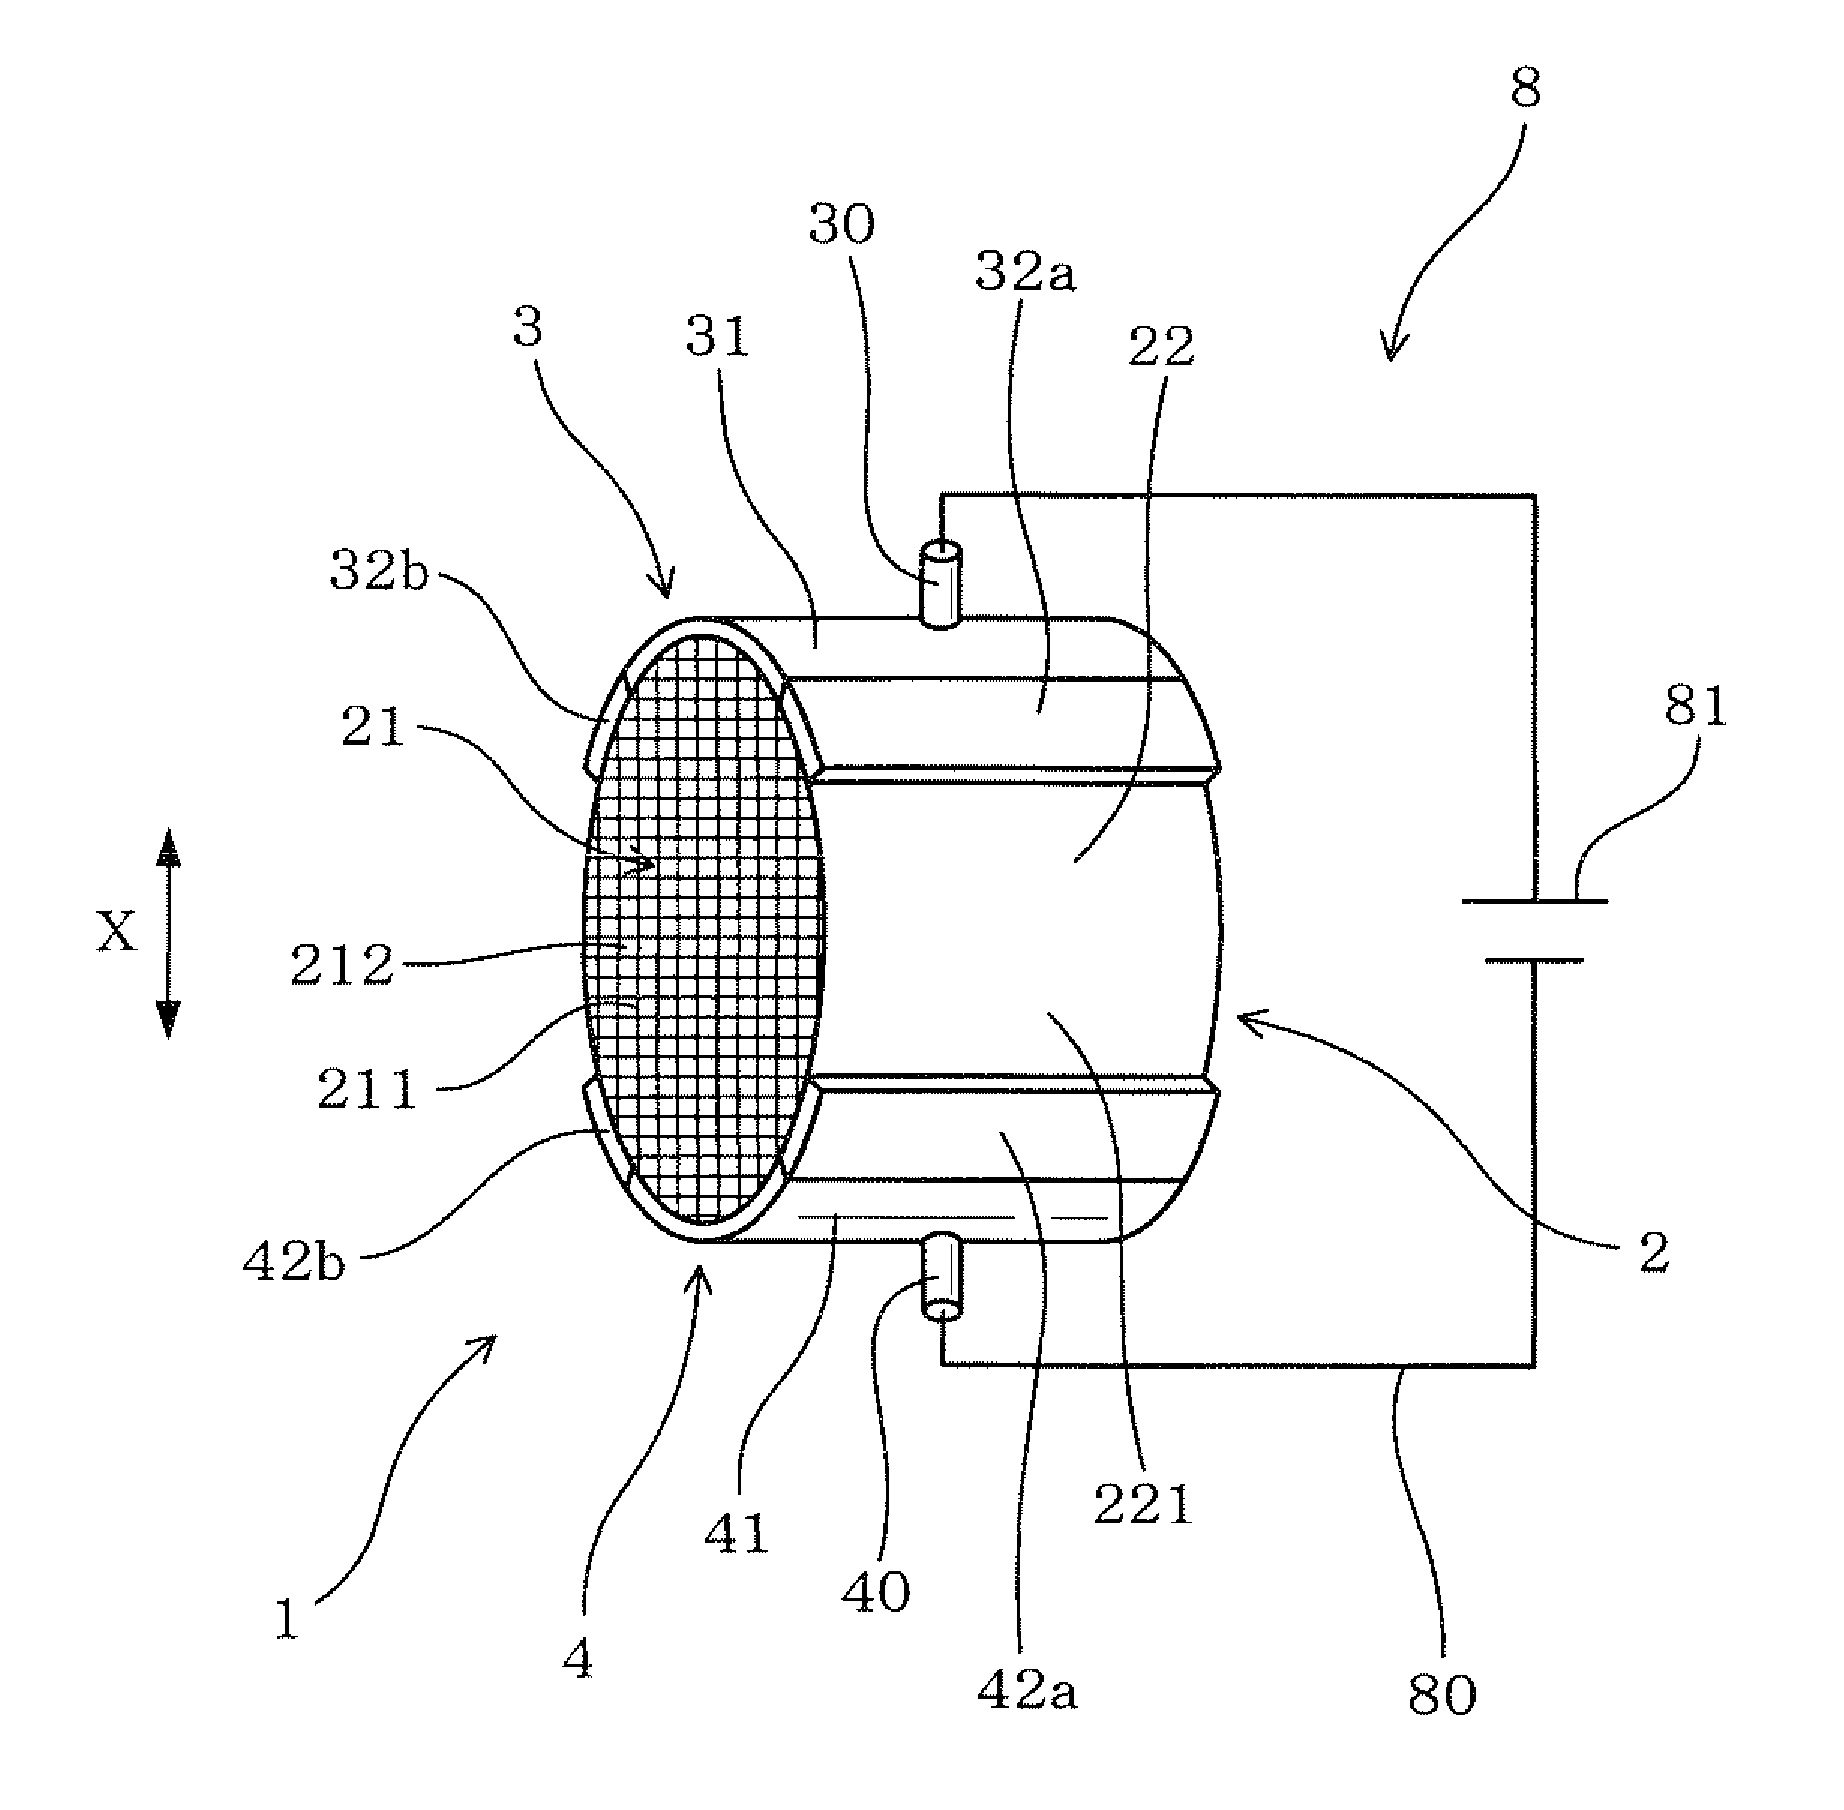 Honeycomb structural body and electrical heated catalyst device